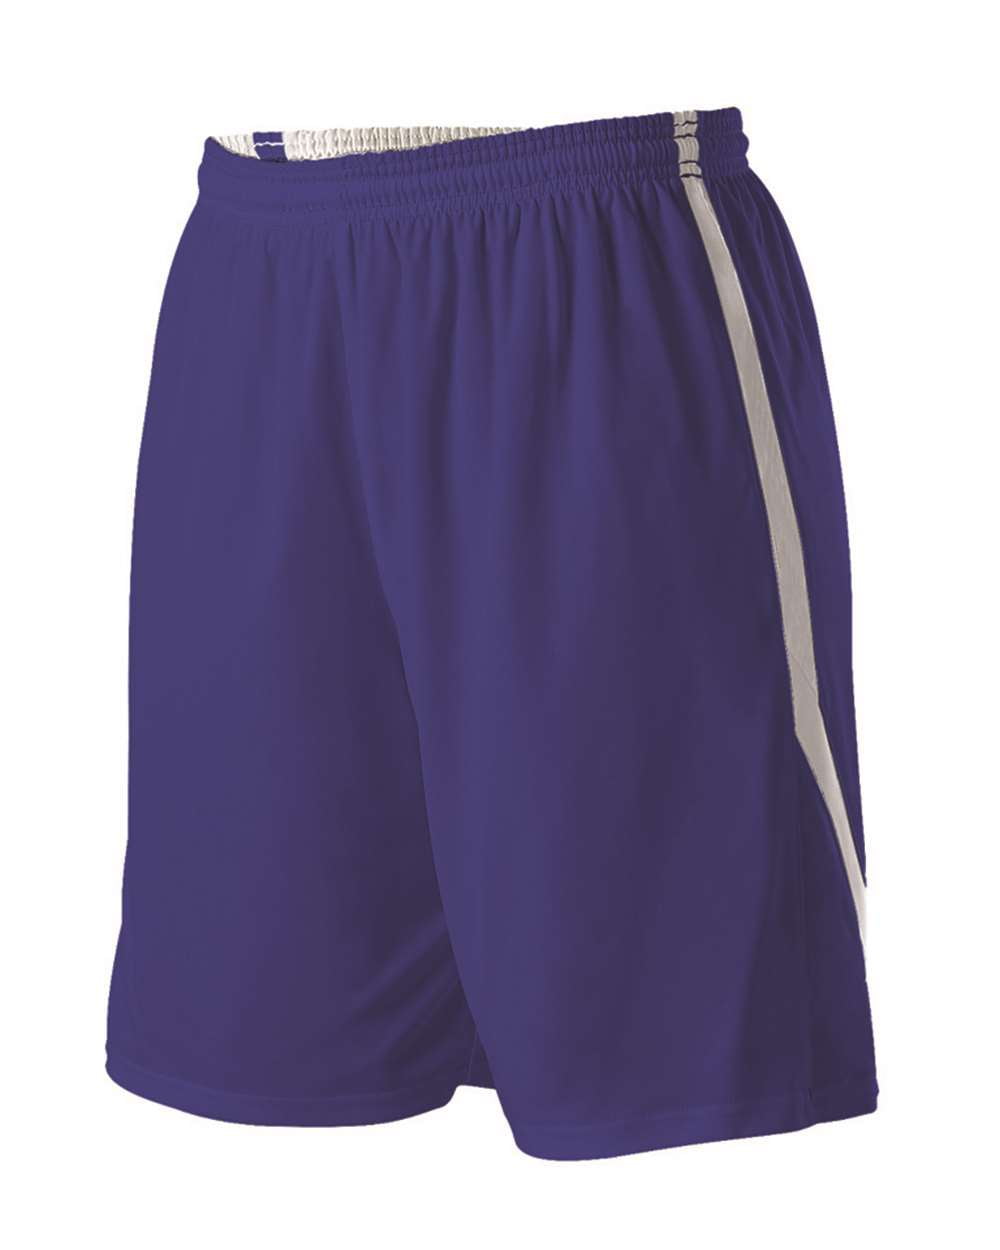 Alleson Athletic - Women's Reversible Basketball Shorts - Color - Royal ...